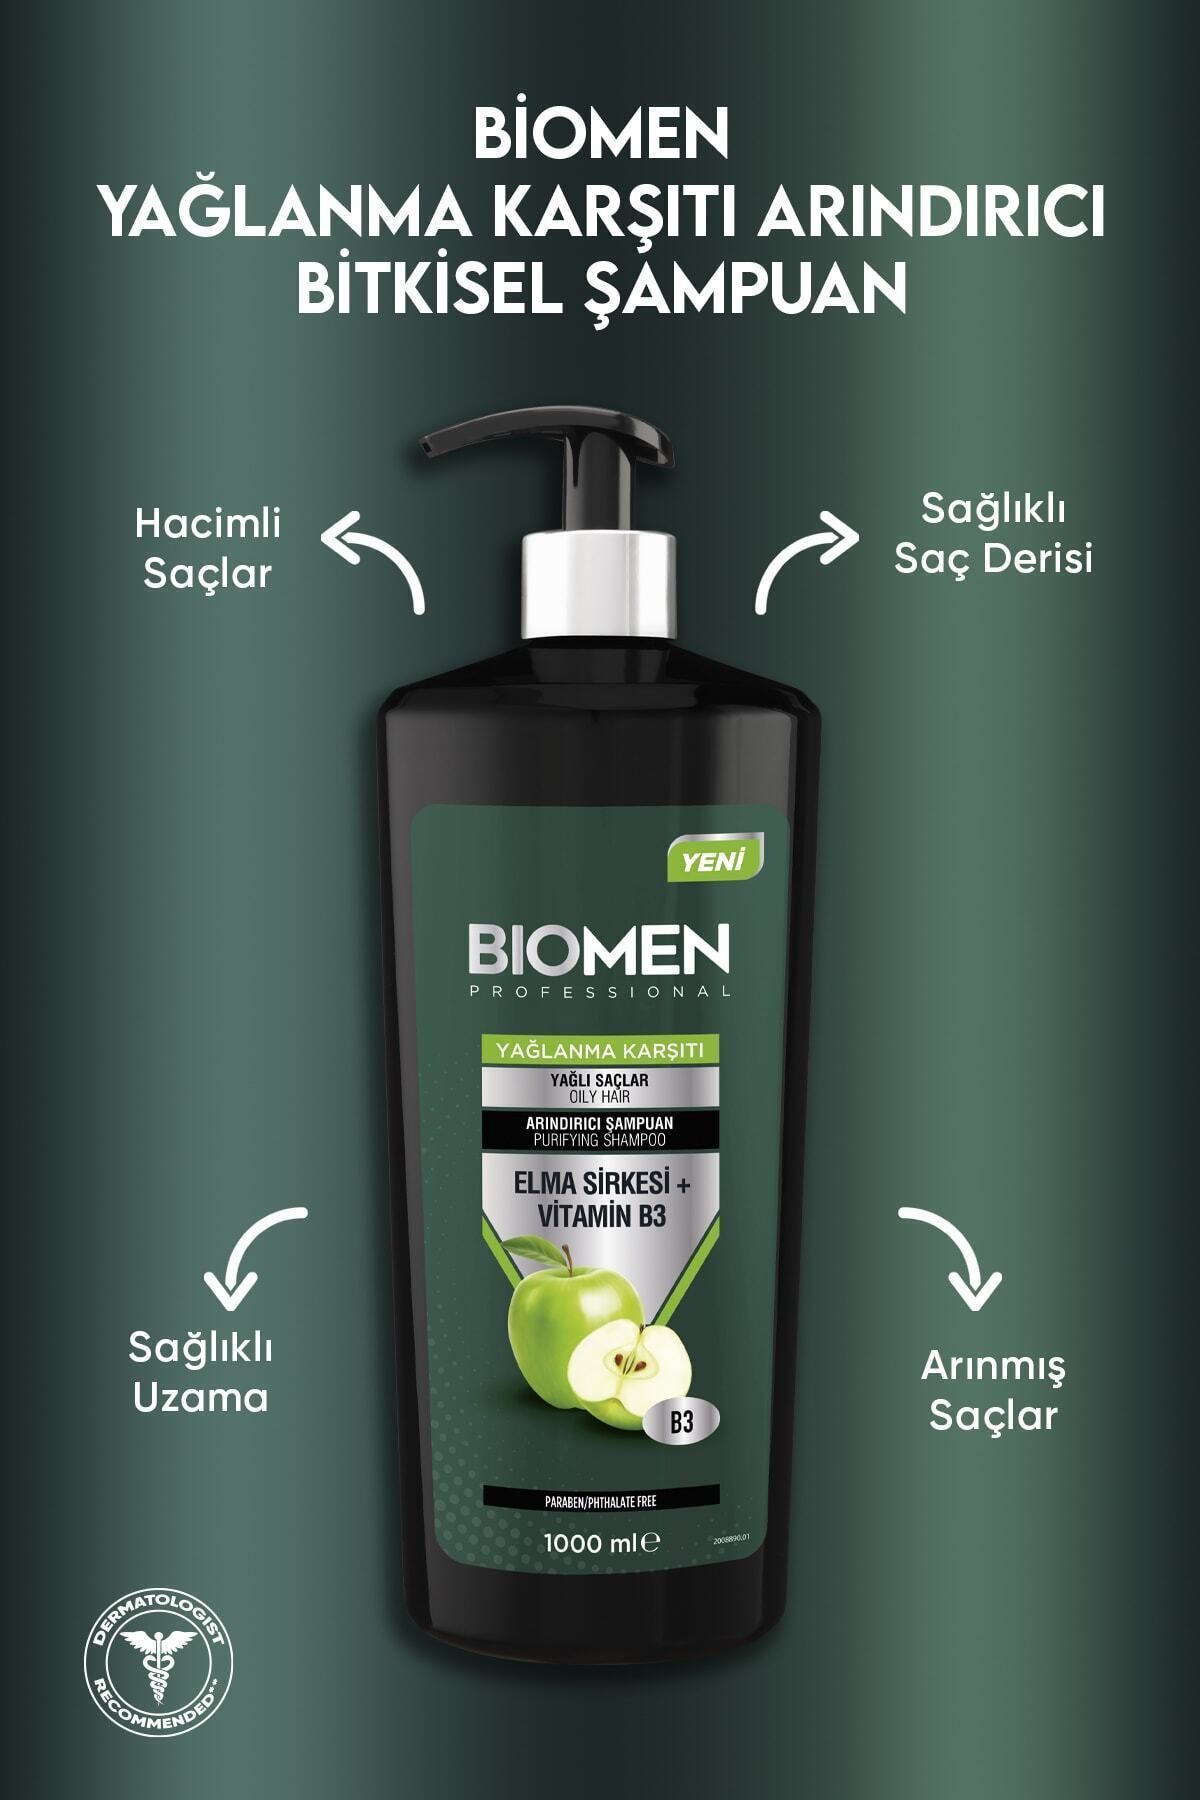 Biomen Effective Anti-Oil Shampoo Containing Apple Cider Vinegar and Vitamin B3, Special for Oily Hair